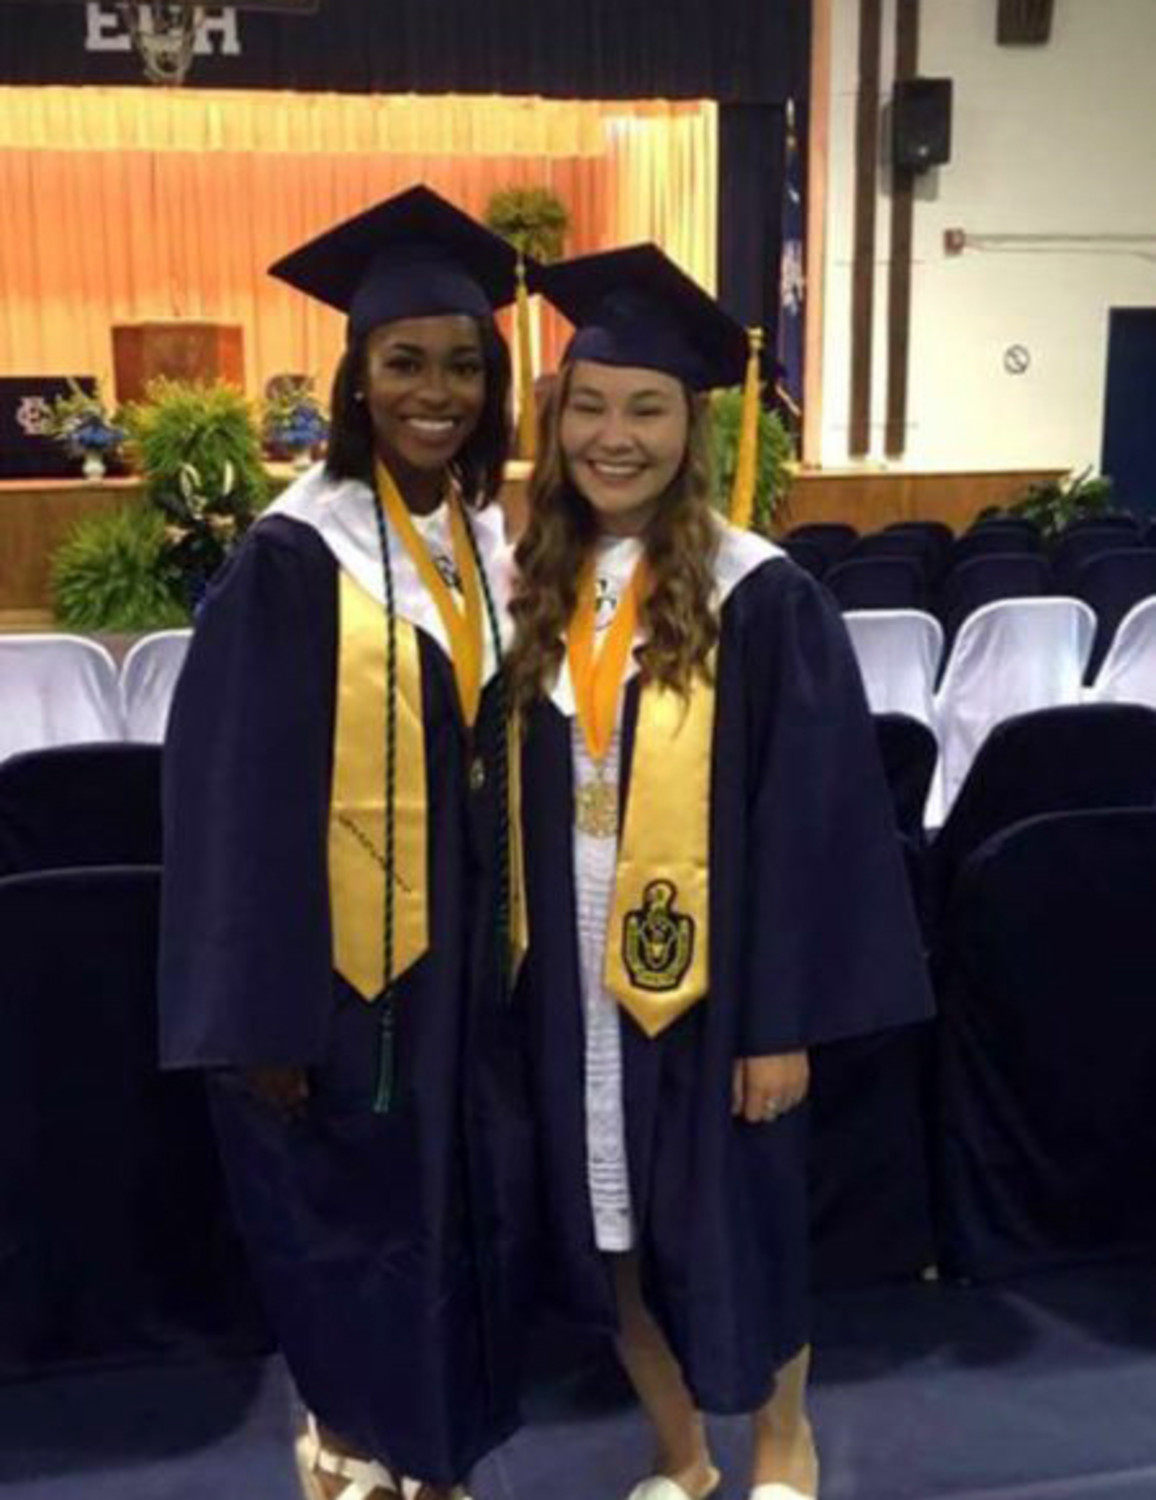 Flury Wilson, left, filed a lawsuit earlier this month in Clarendon County common pleas court, alleging that various officials in Clarendon School District 3 deliberately altered grades or behaved in some other manner to keep her from being the Class of 2016 valedictorian outright.